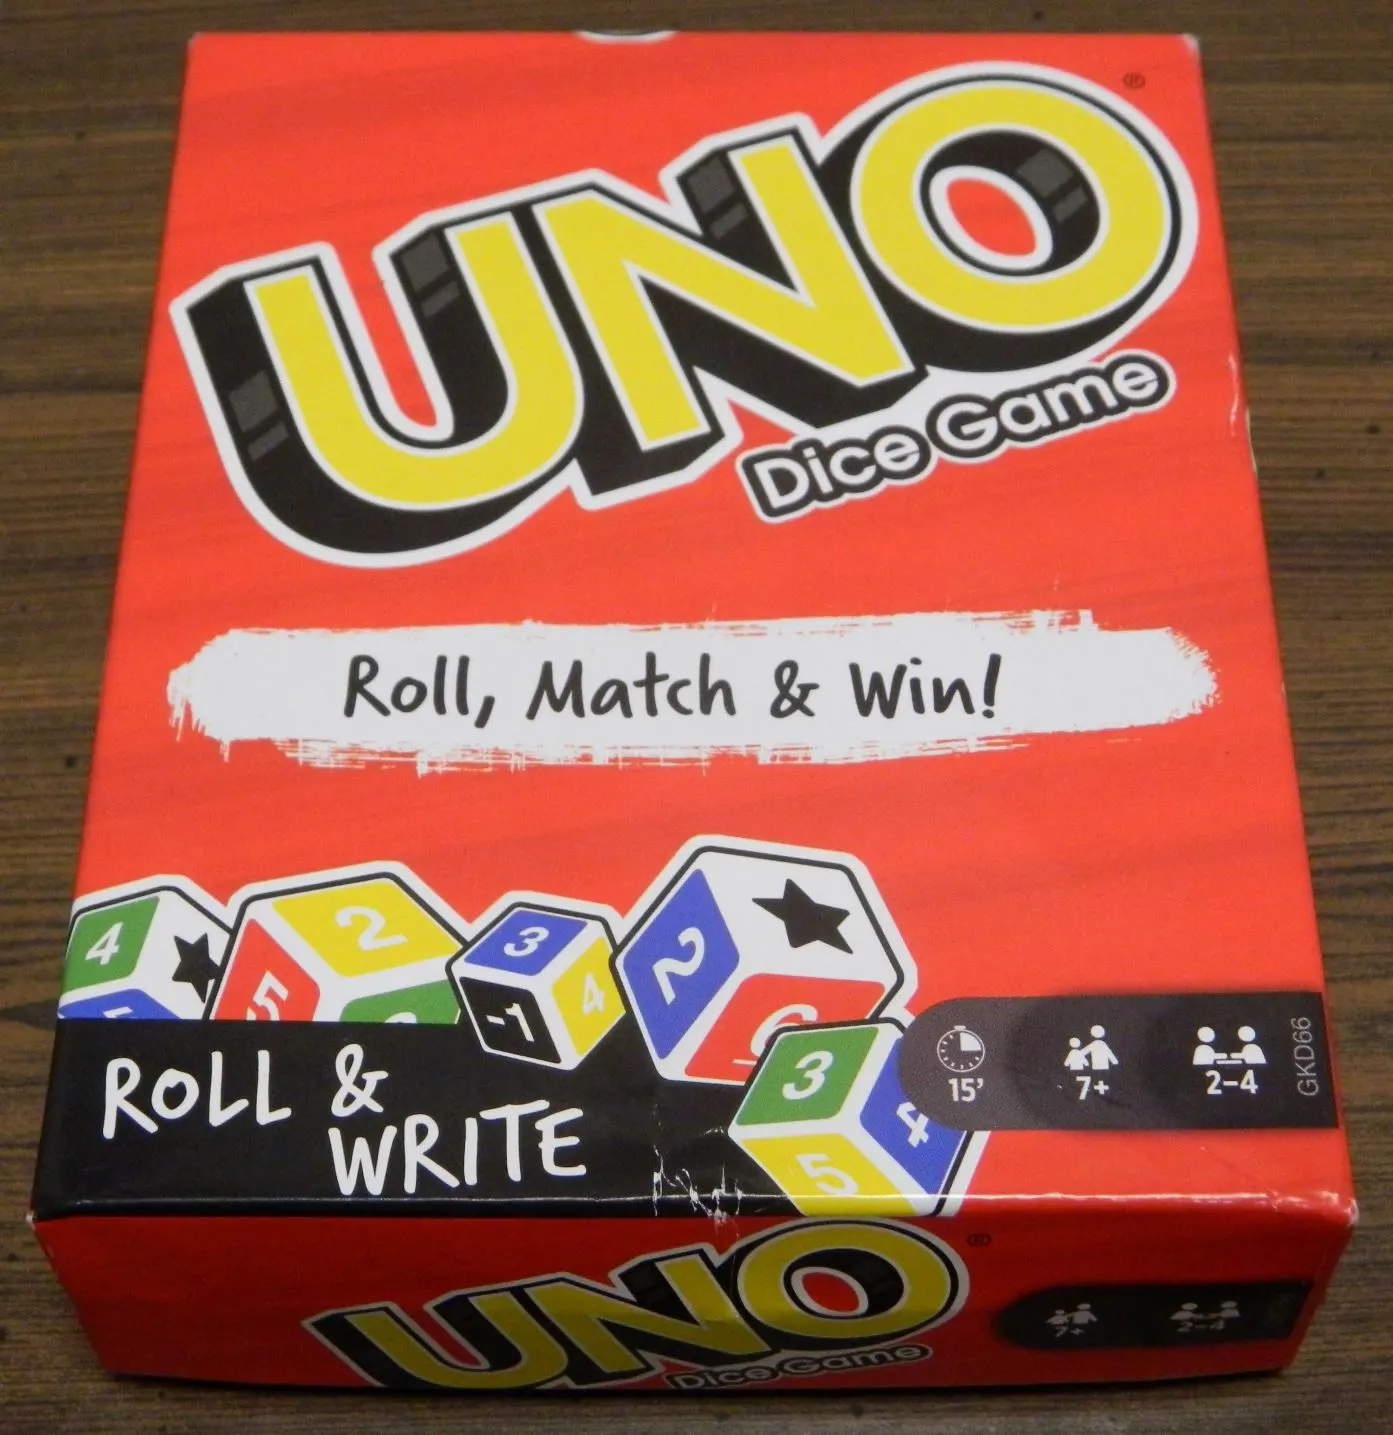 Box for UNO Dice Game Roll and Write